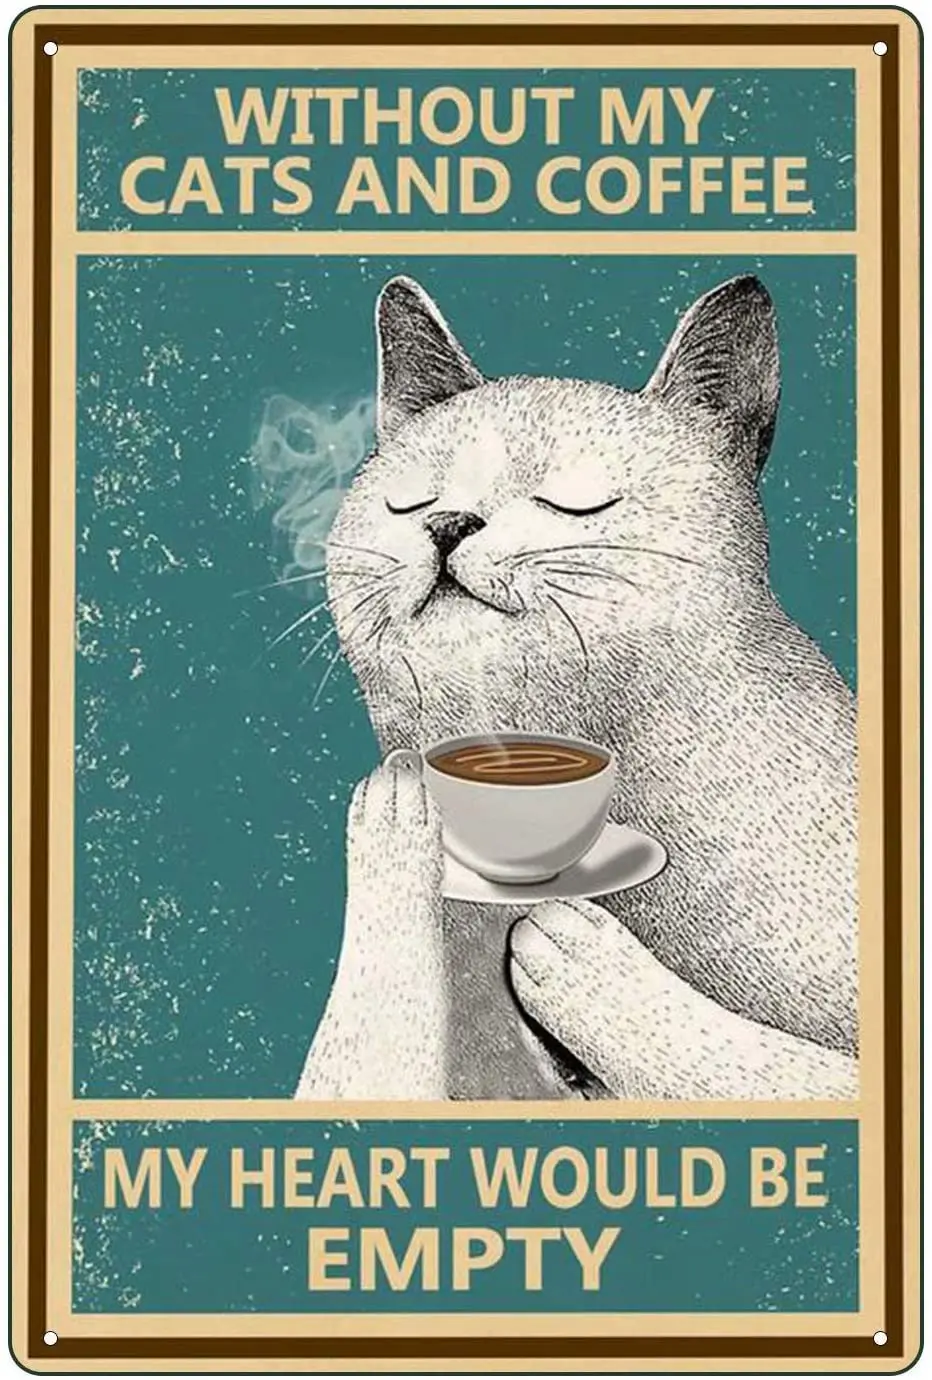 

Retro Cat Metal Tin Sign Without My Cats and Coffee My Heart Would Empty .Bar Wall Decor Funny tin Sign 12x8 Inch